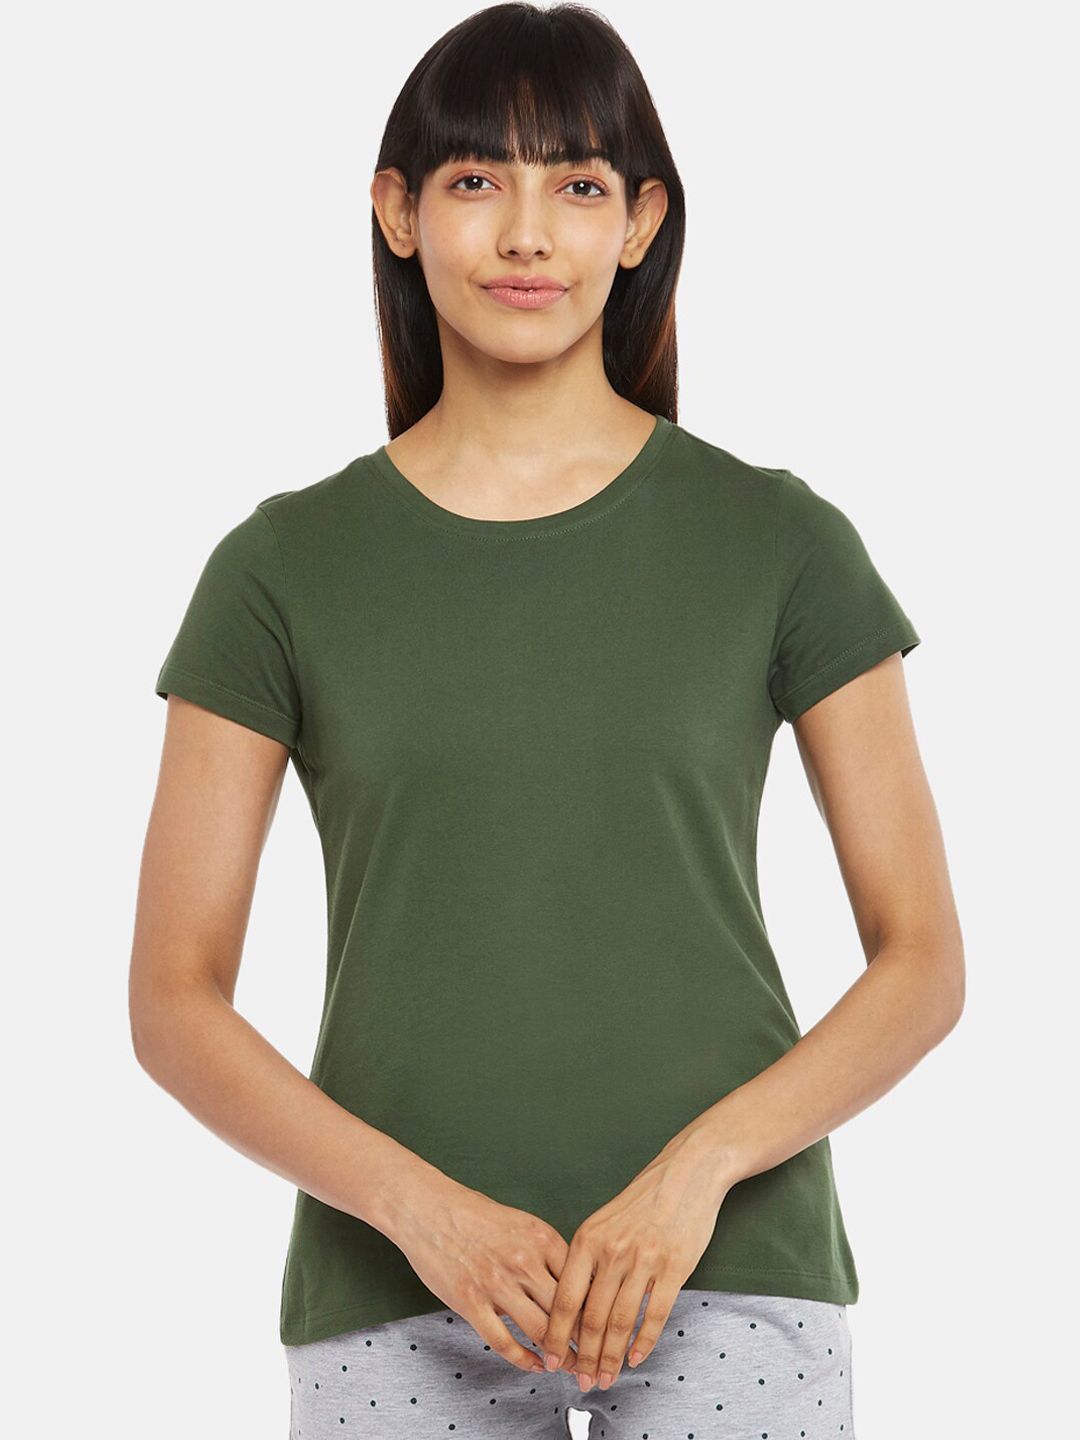 Dreamz by Pantaloons Women Green Round Neck Lounge Tshirts Price in India